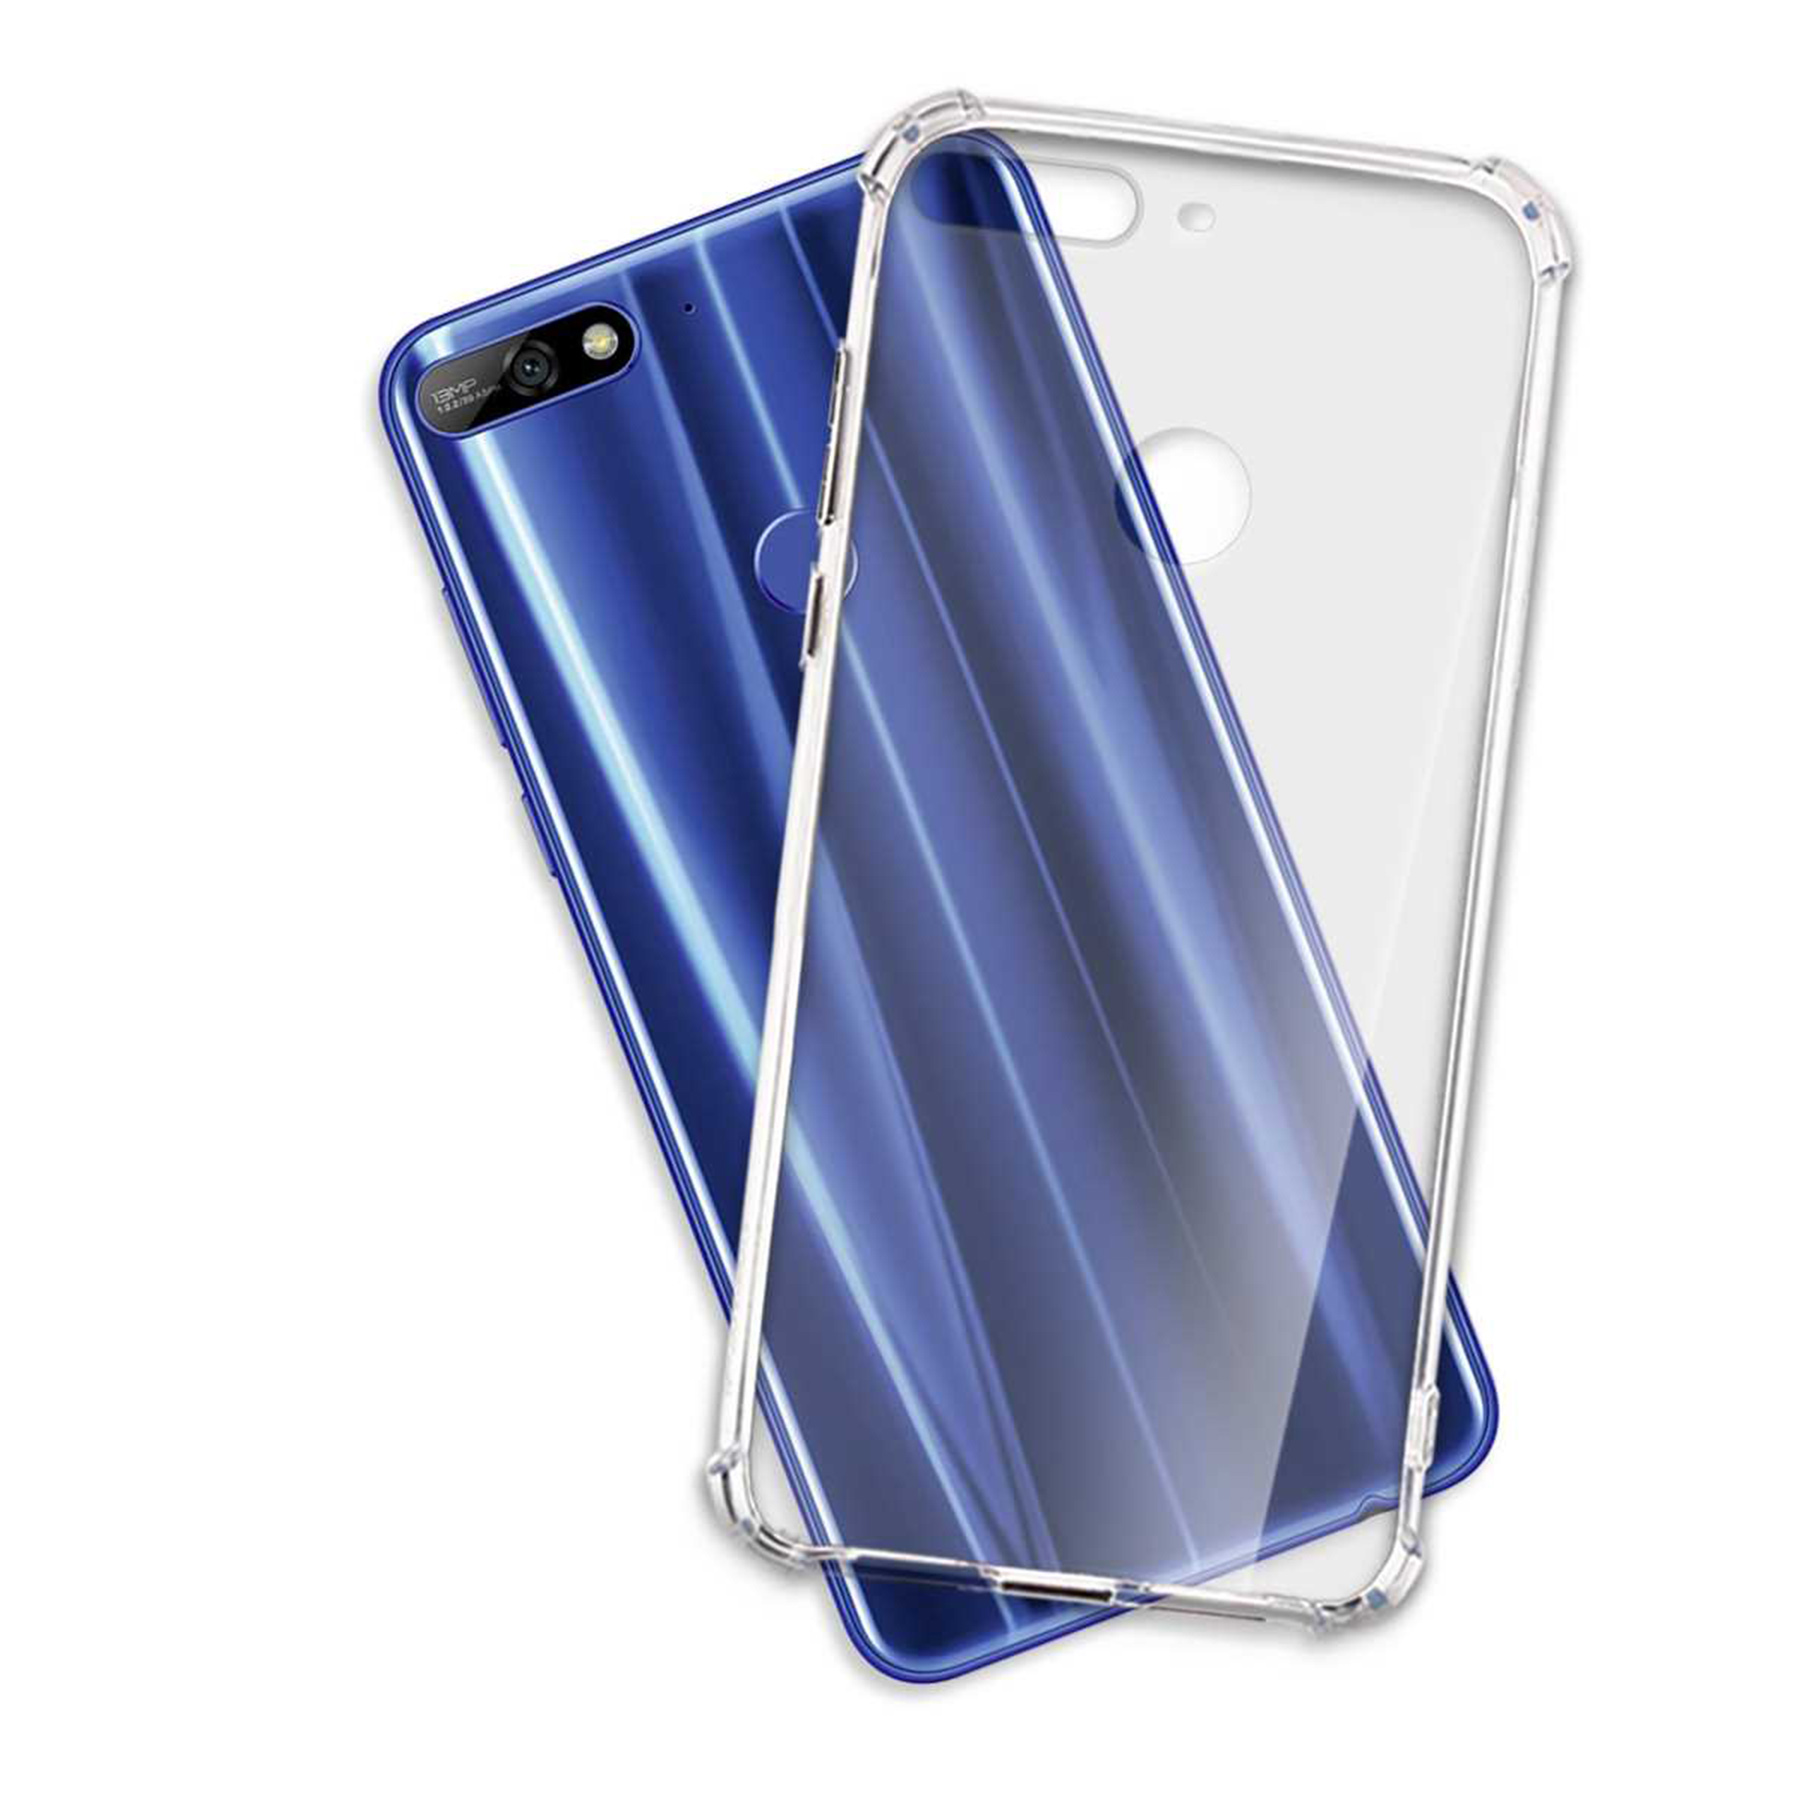 MTB MORE ENERGY 7C, Case, Transparent Backcover, Prime 2018, Huawei, 2018, Armor Y7 Y7 Honor Clear